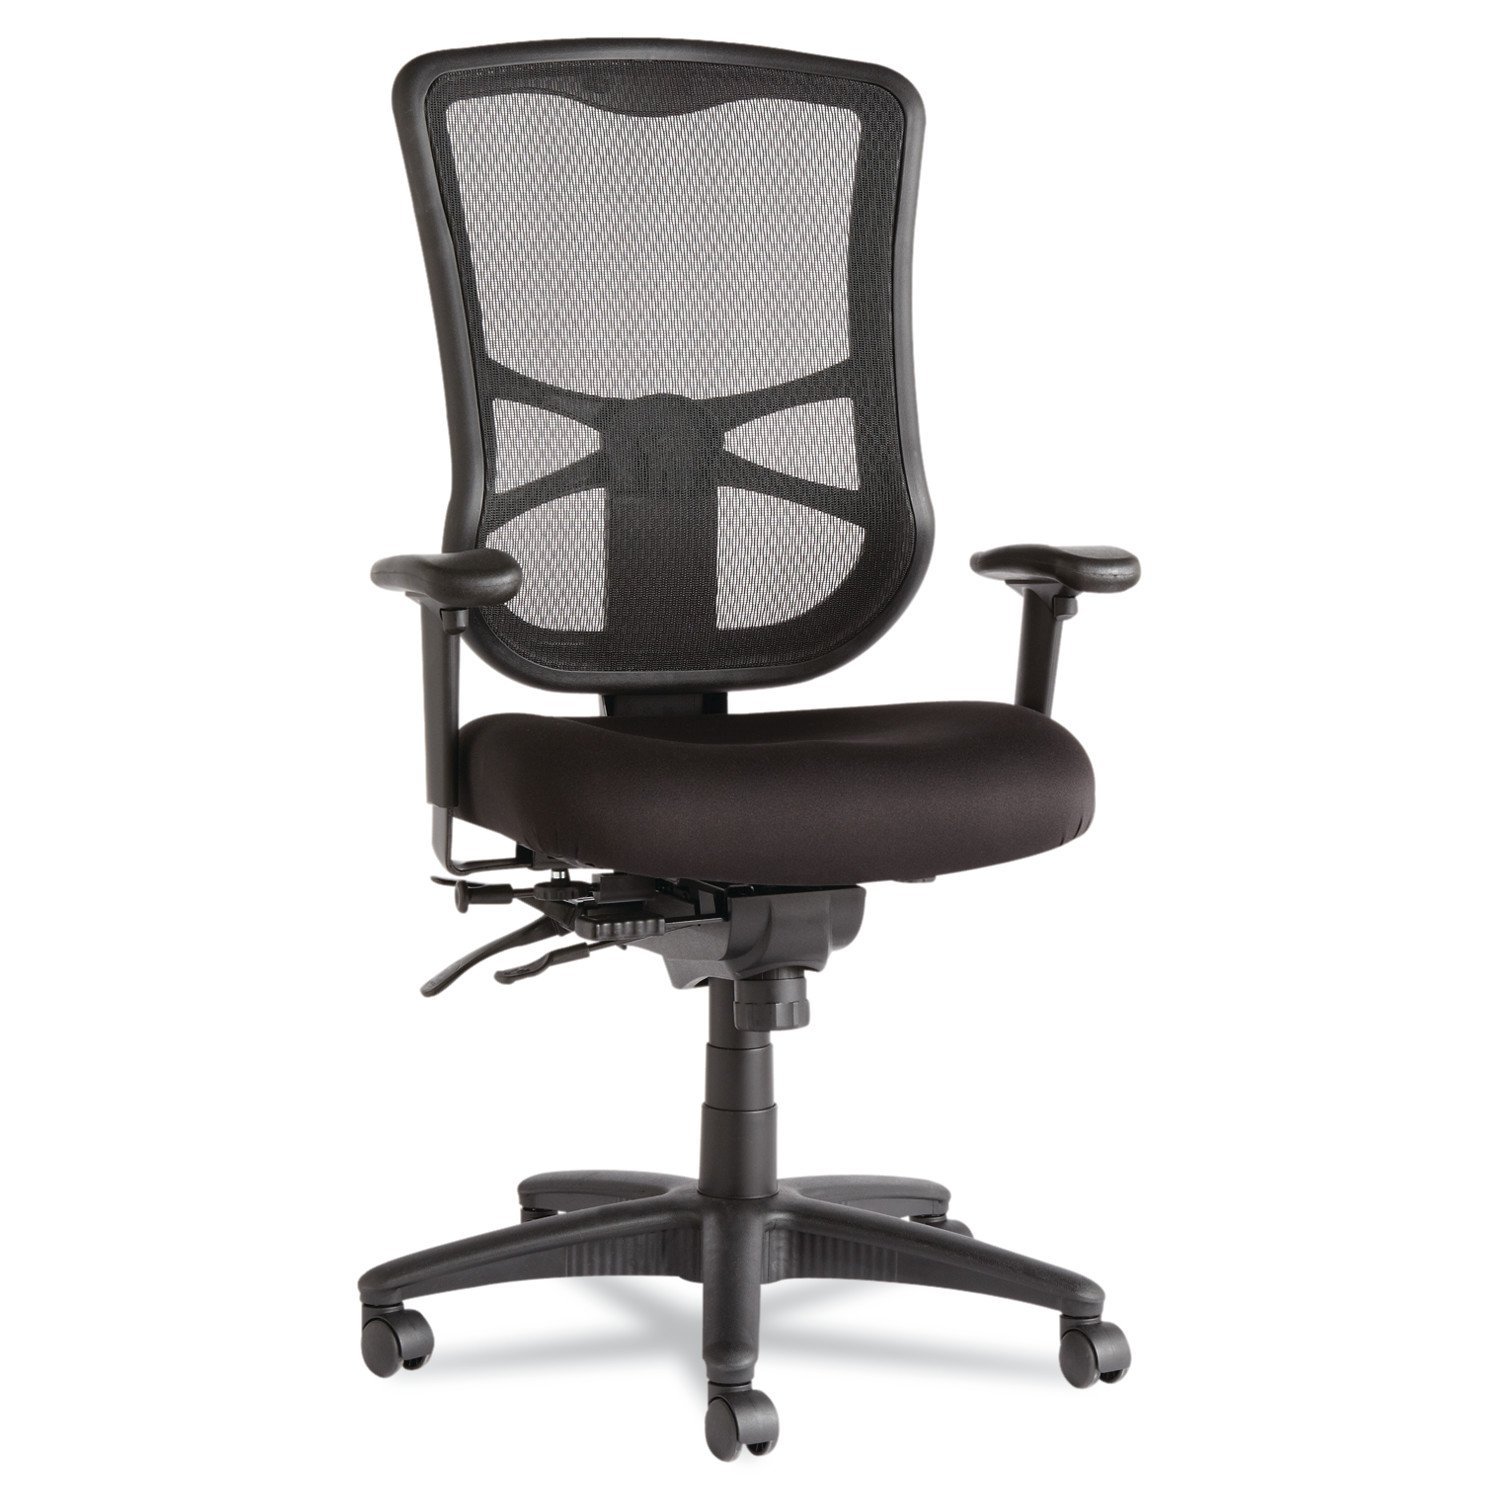 Alera Elusion High-Back Office Chair